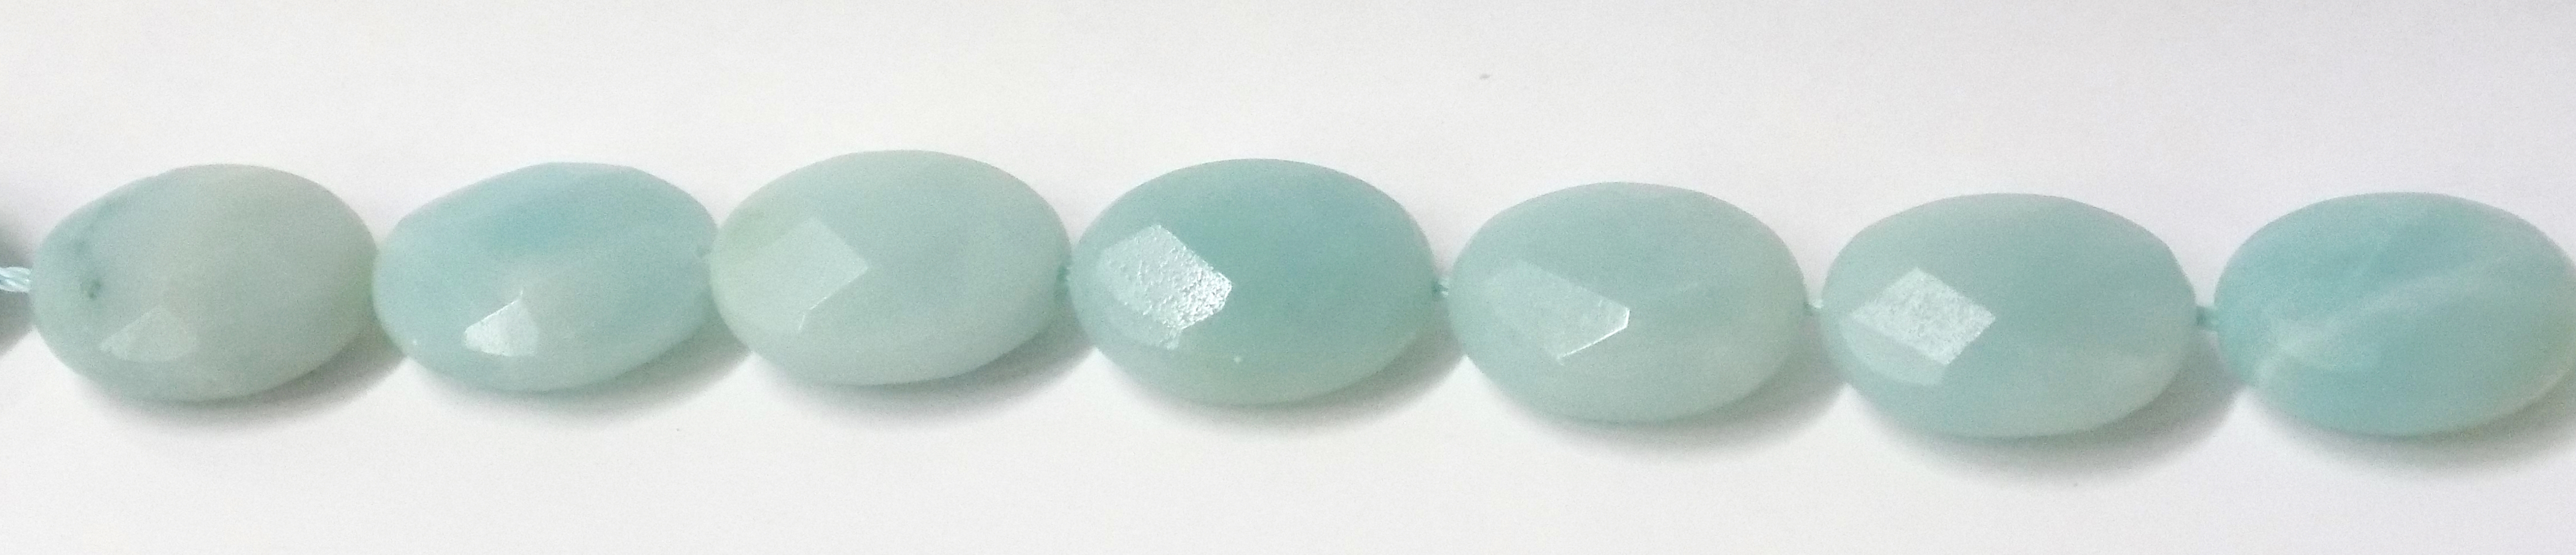 amazonite oval faceted 12x16mm wholesale gemstones